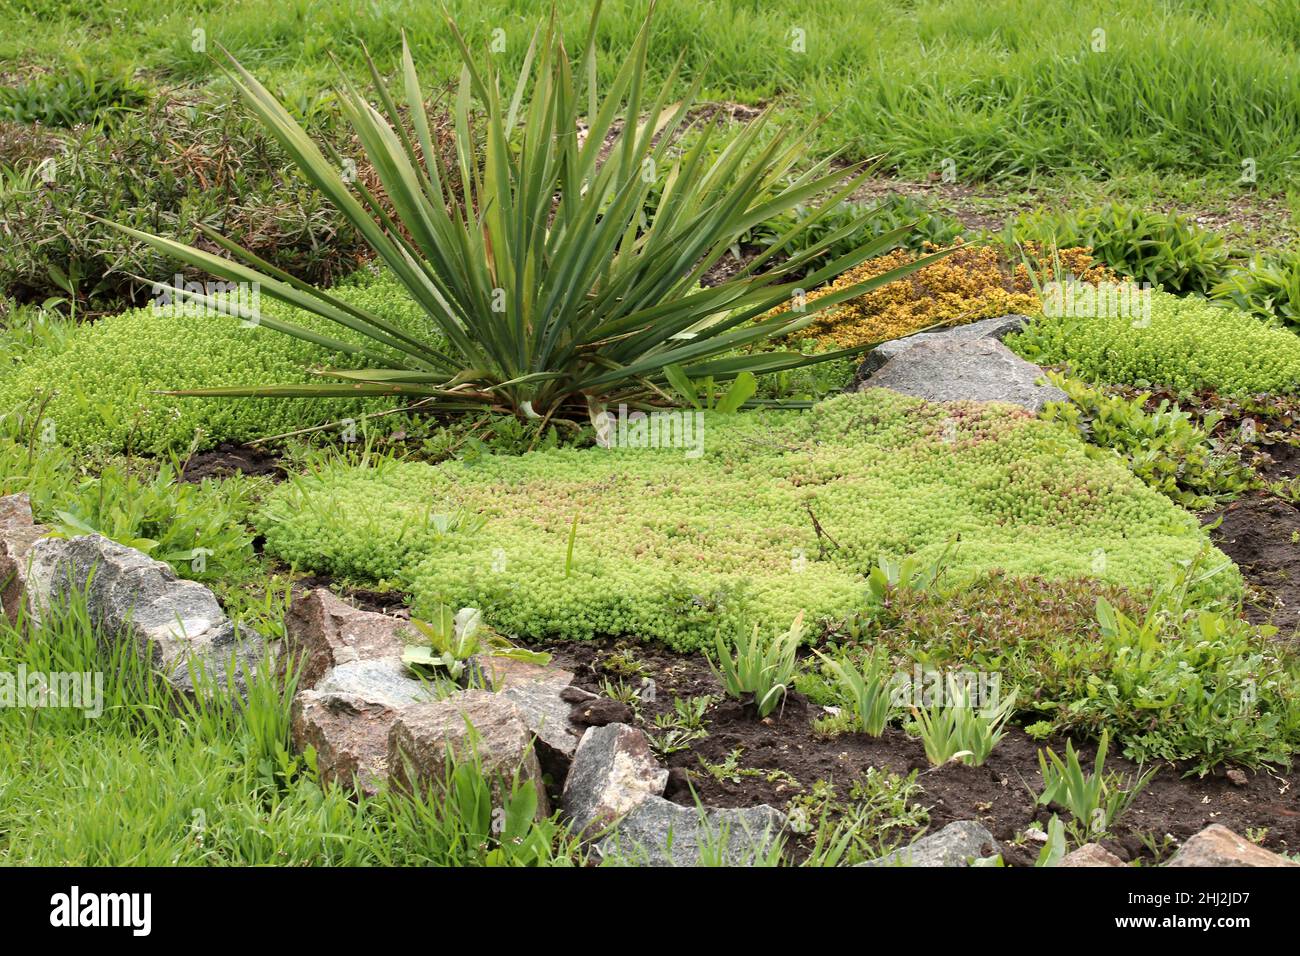 Young shoots of white stonecrop and   palm yucca, growing in flower bed. Sedum album. Stock Photo